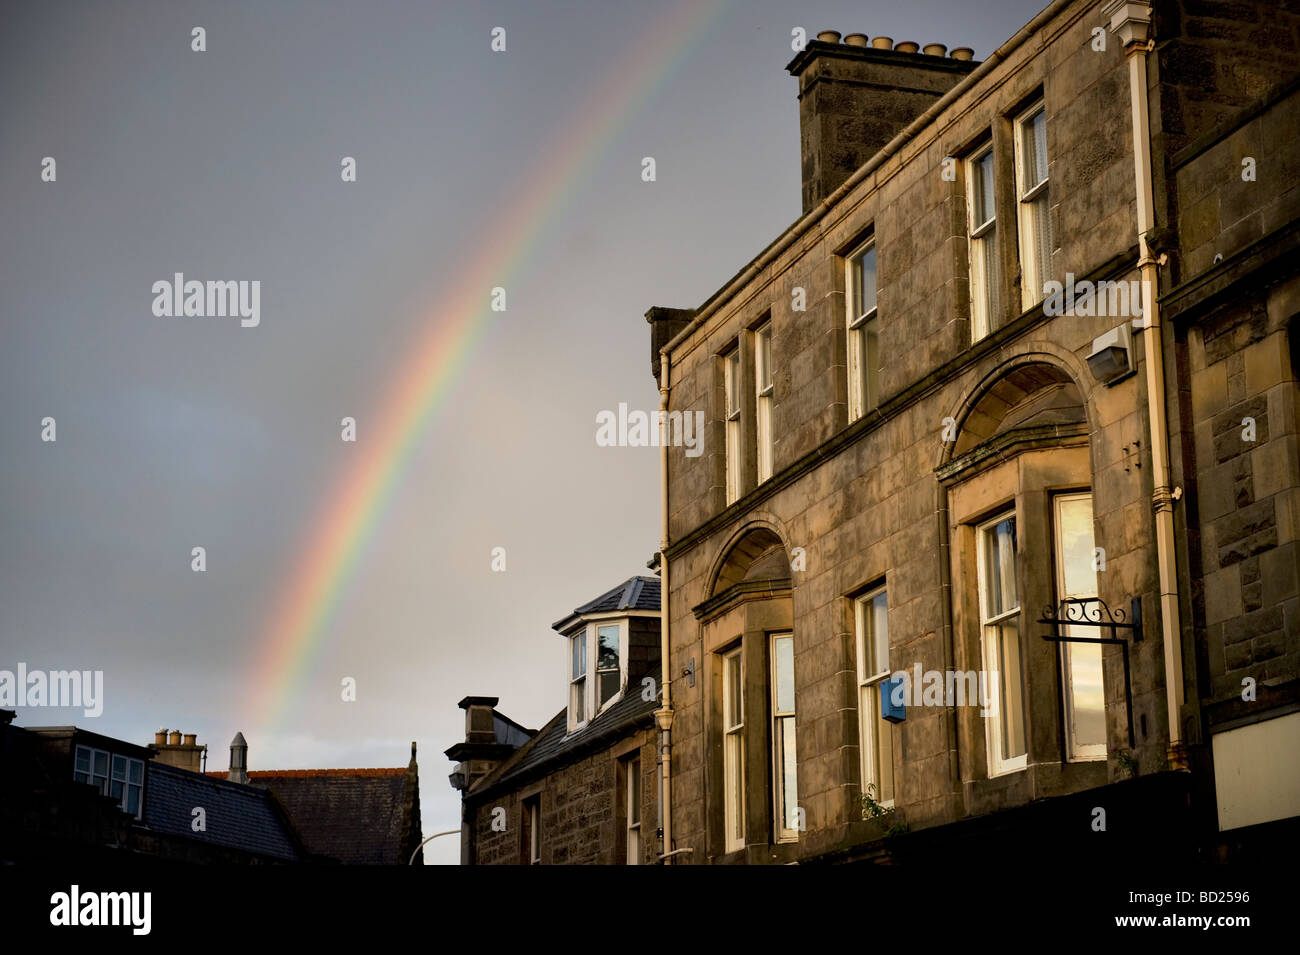 A rainbow forms over Elgin, Moray, Scotland on a summer's evening July 2009 Stock Photo